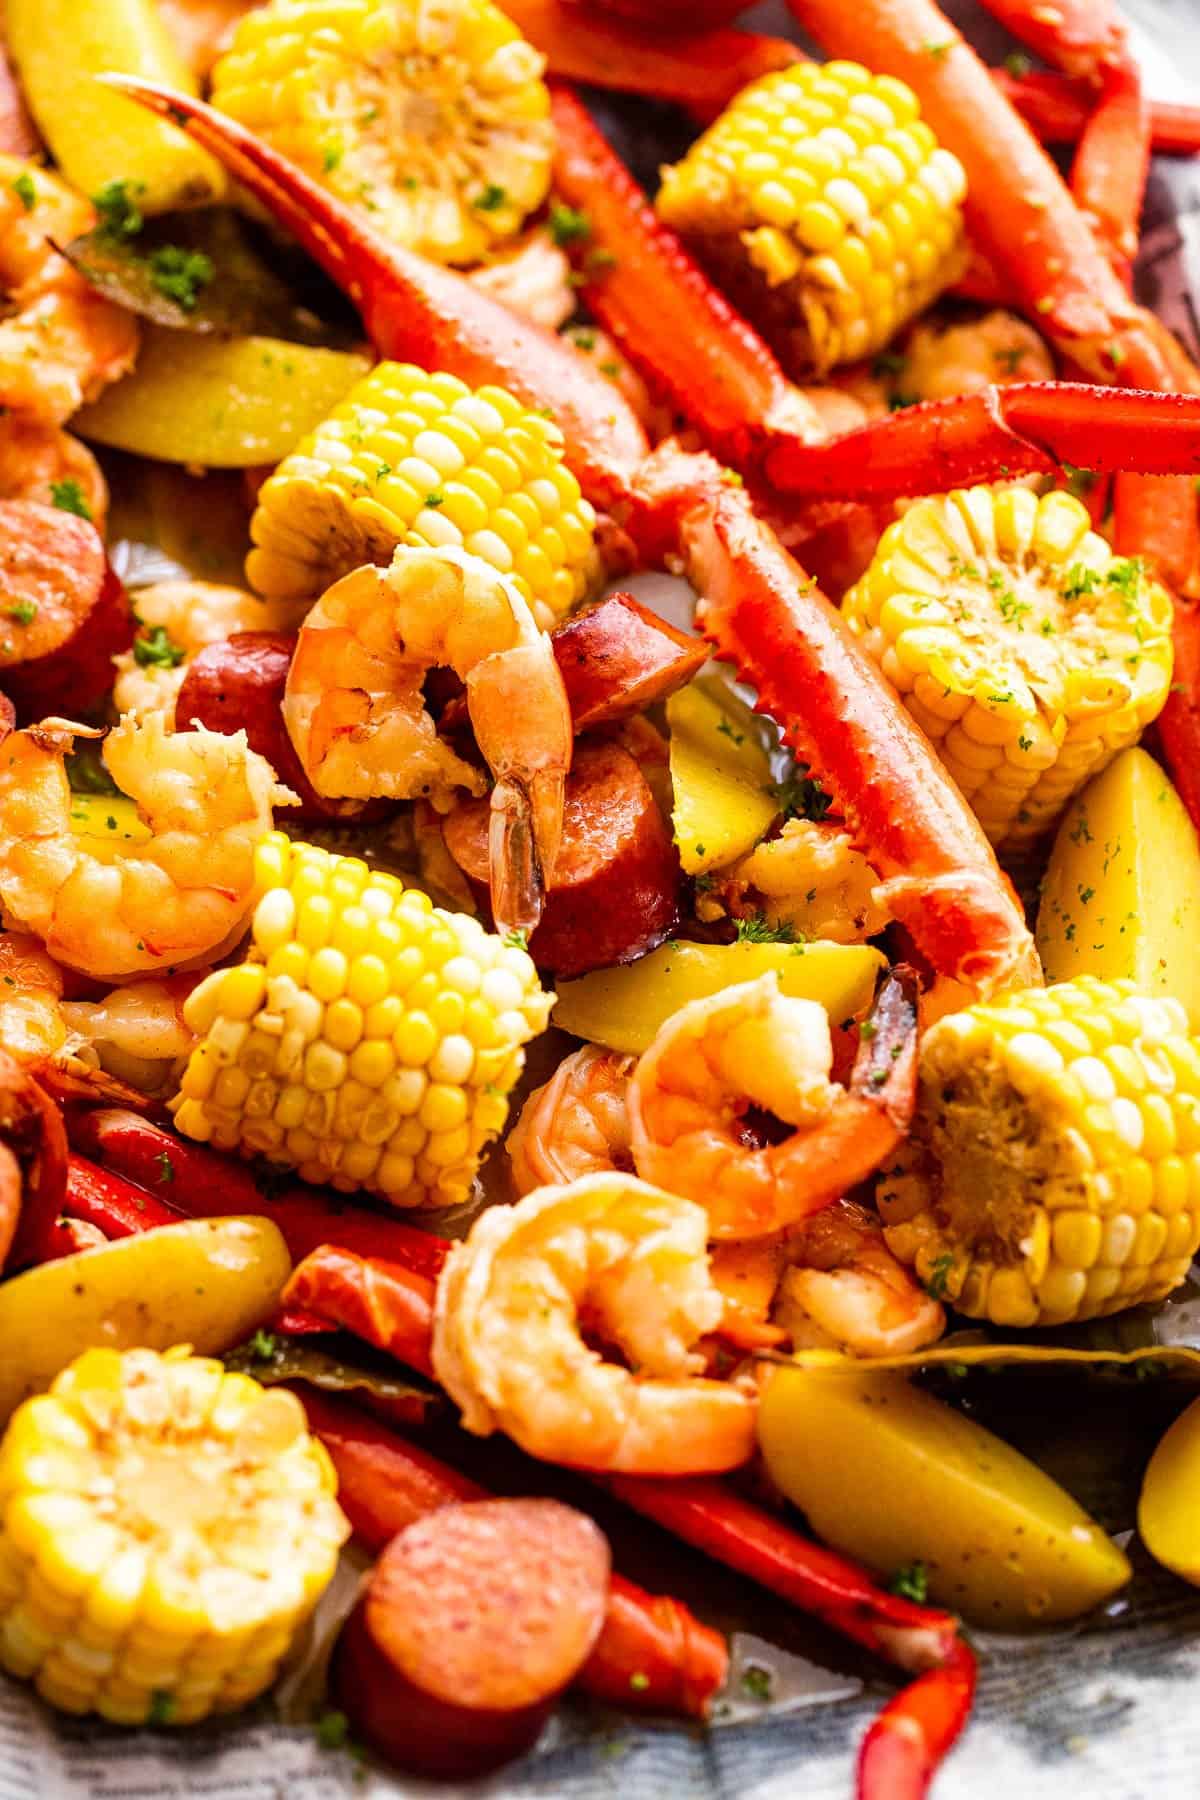 Seafood Boil with Garlic Butter Sauce | Diethood